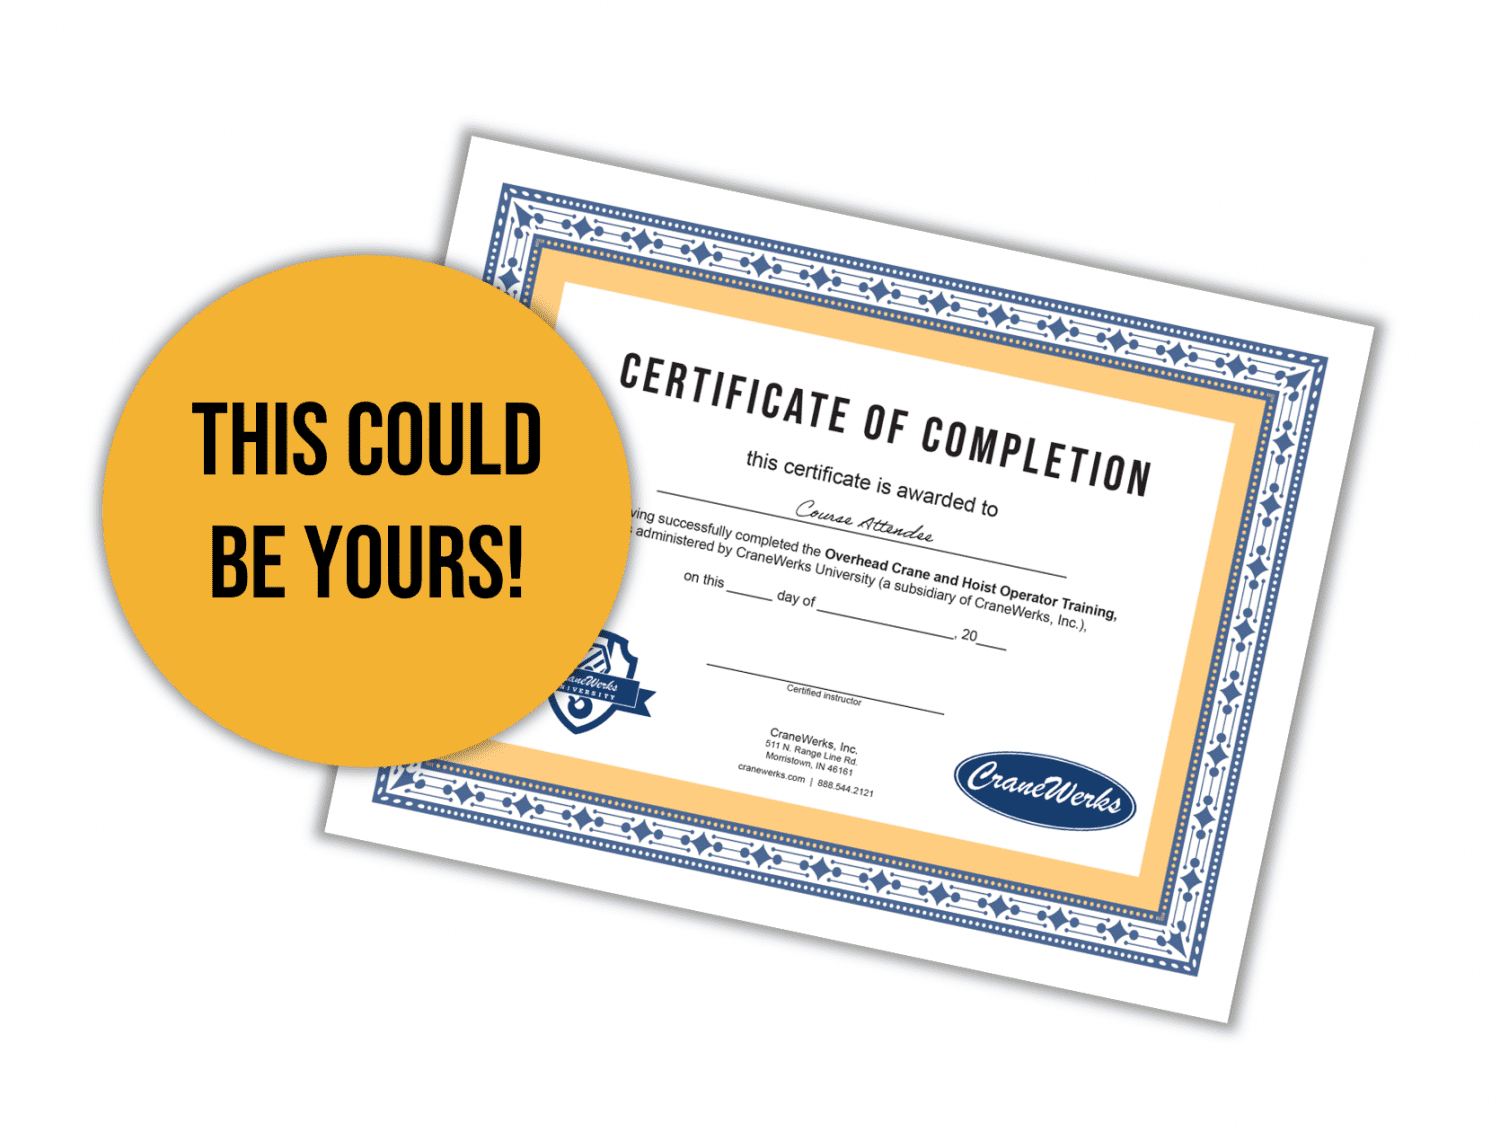 Yellow and Blue Certificate of Completion for CraneWerks University Training Courses with "This could be yours!" promotion